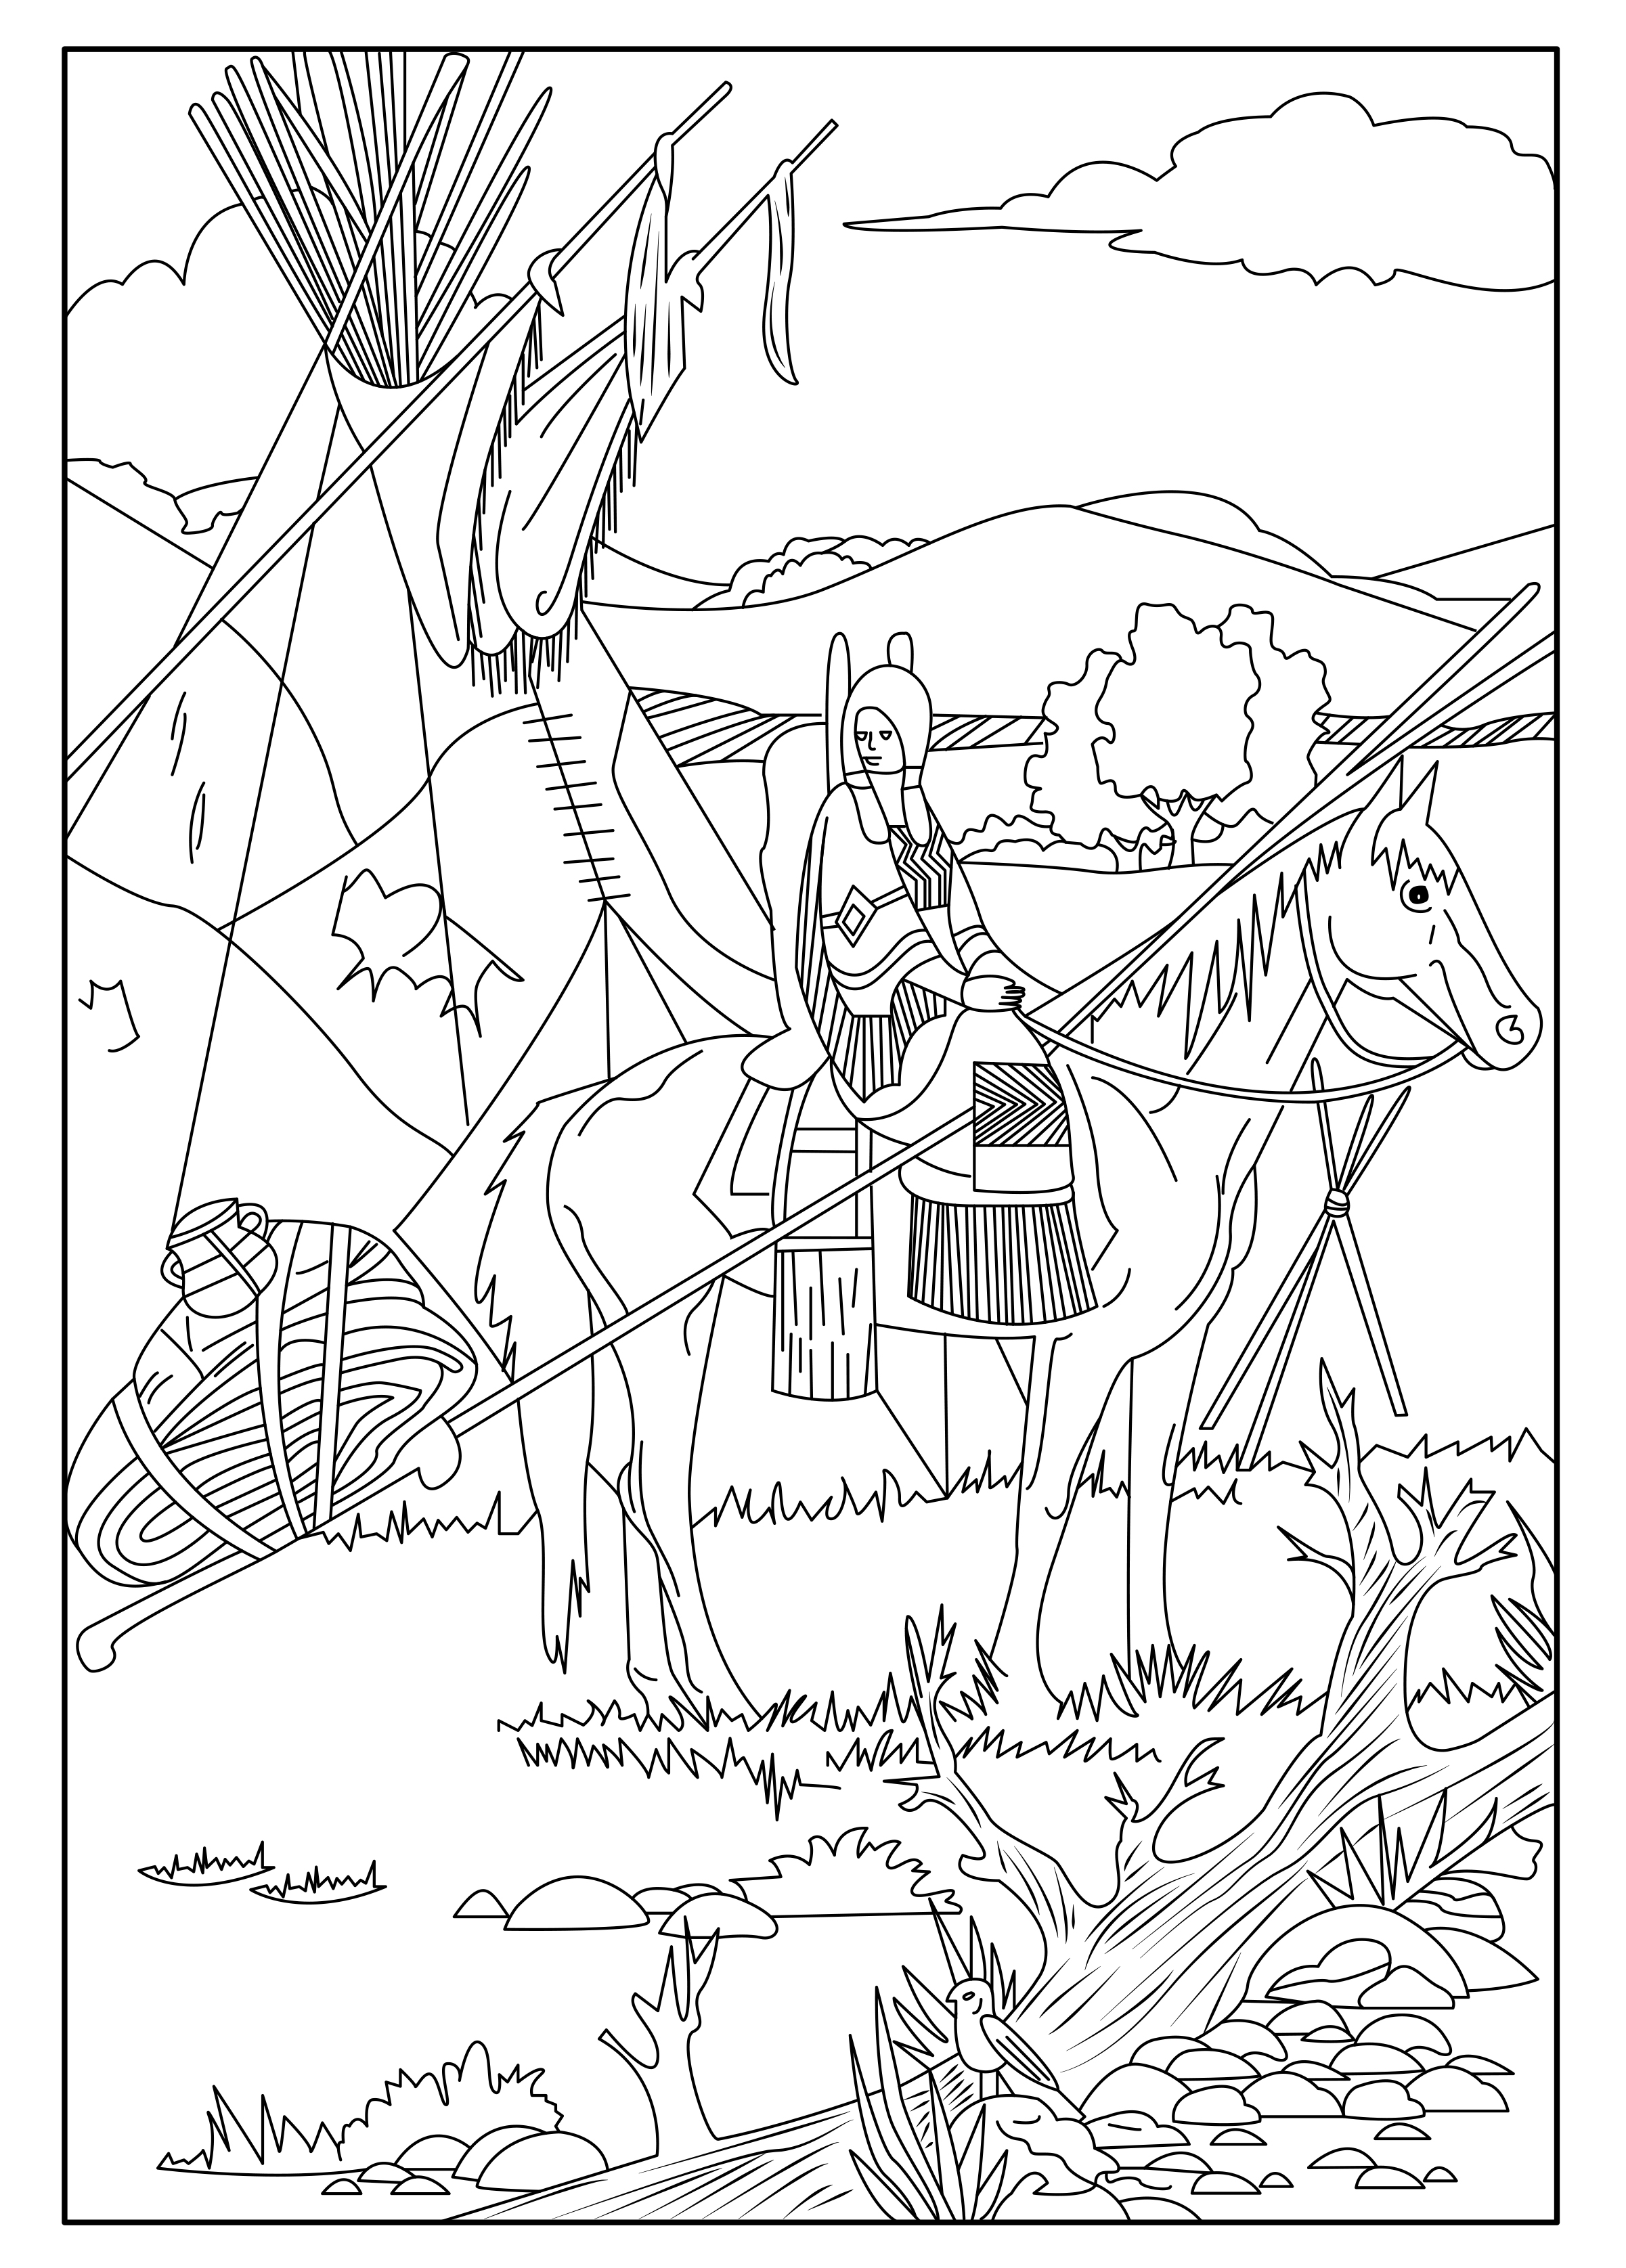 This coloring page show a Native American on his horse, Artist : Celine